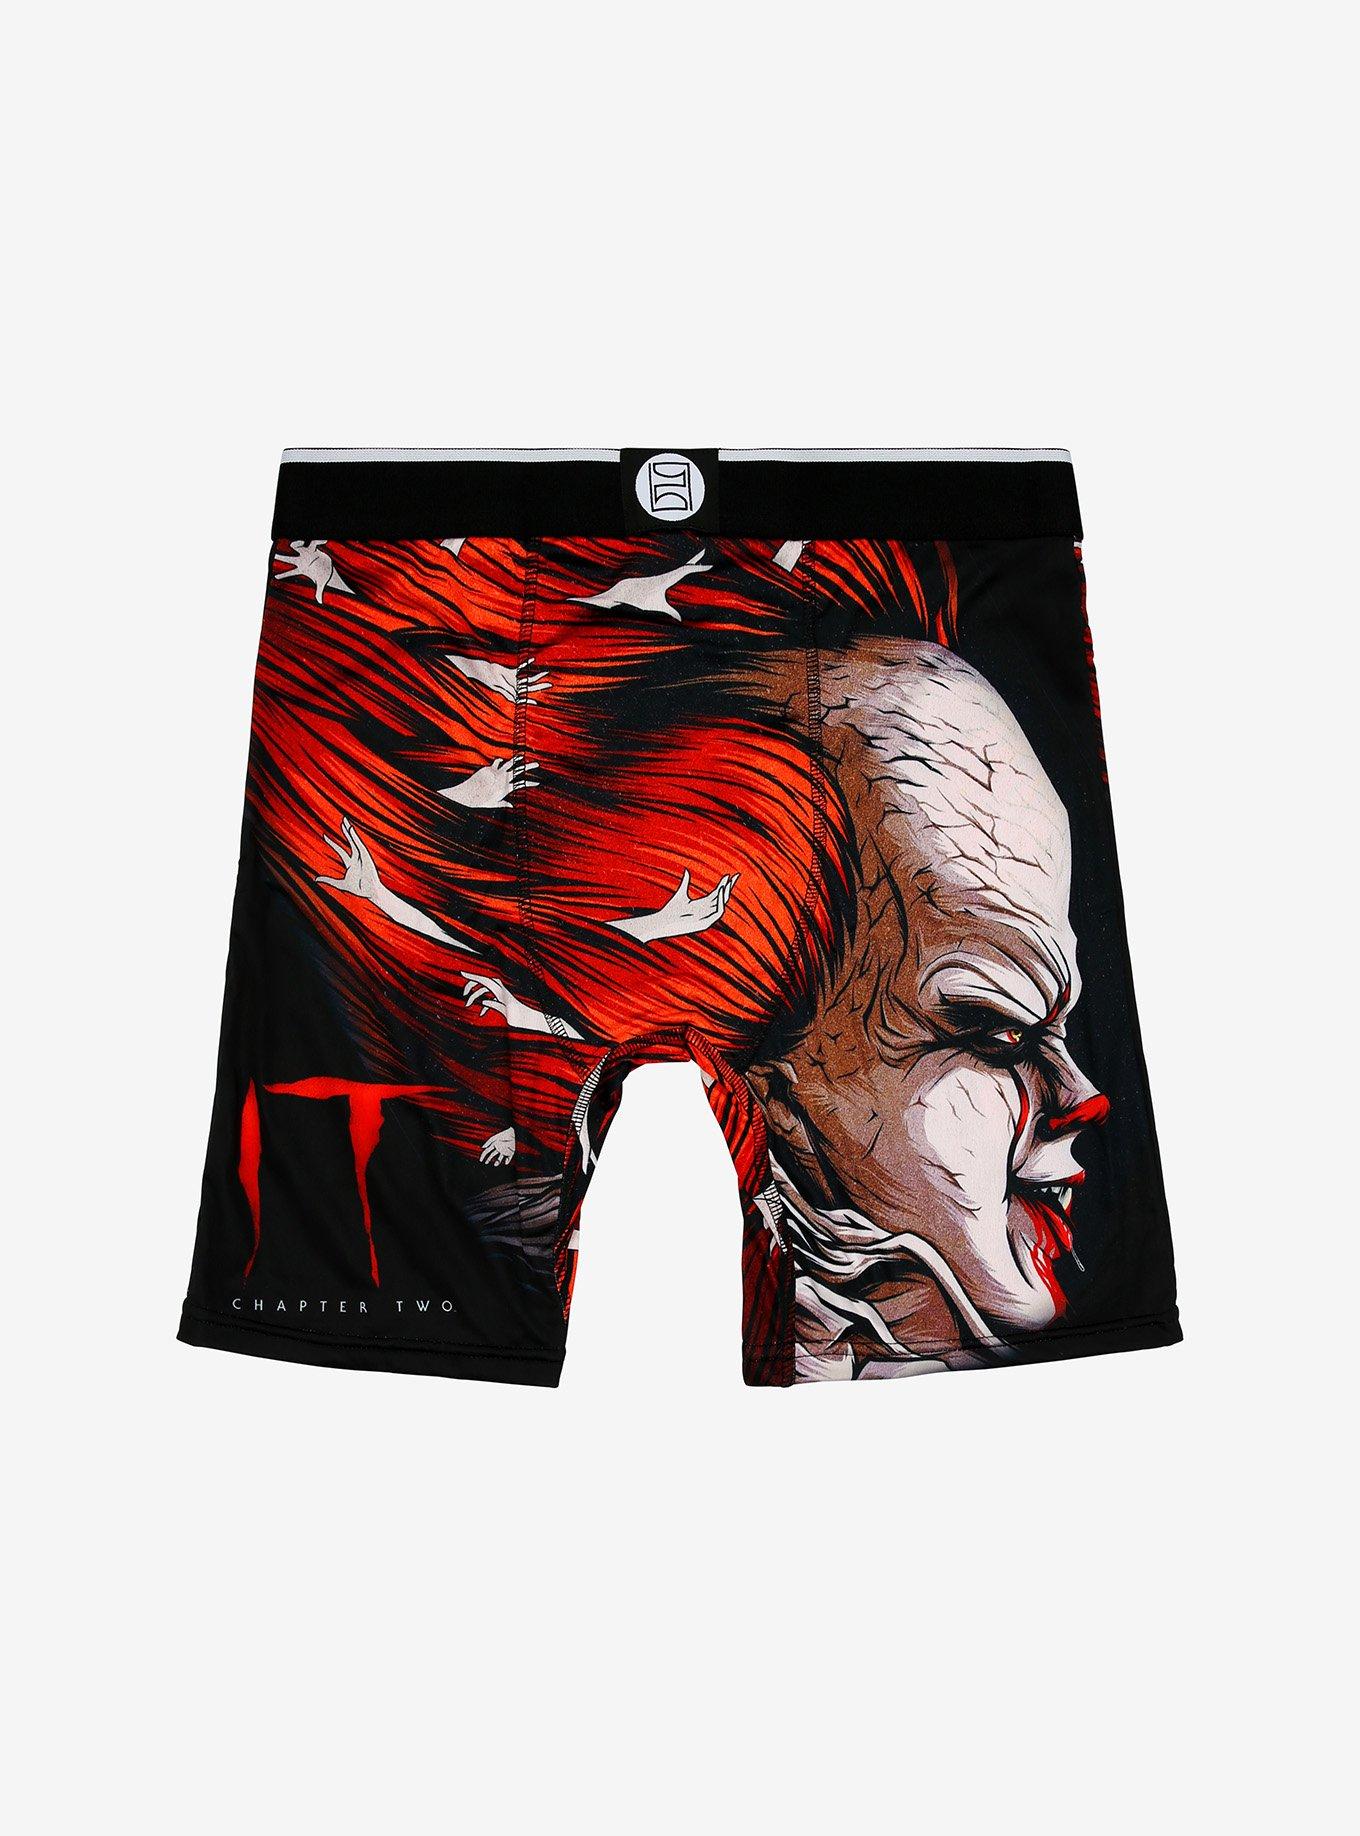 IT Pennywise Boxer Briefs, MULTI, alternate